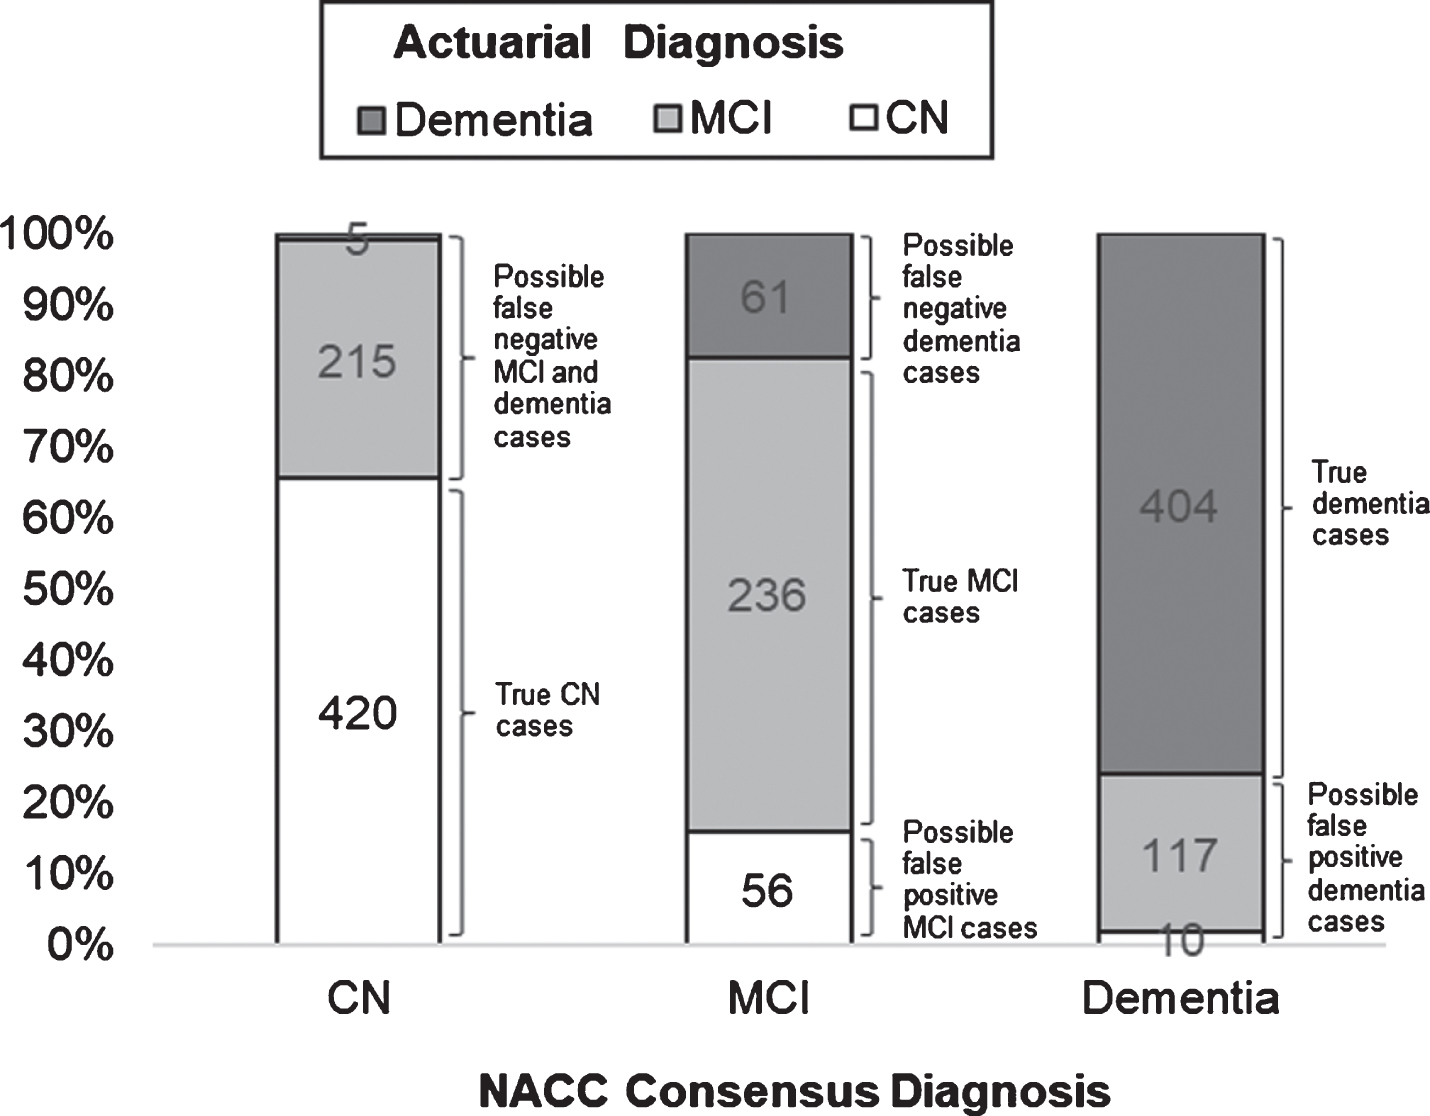 Frequencies and relative proportions of actuarial classifications across NACC consensus diagnoses, with corresponding possible diagnostic errors.